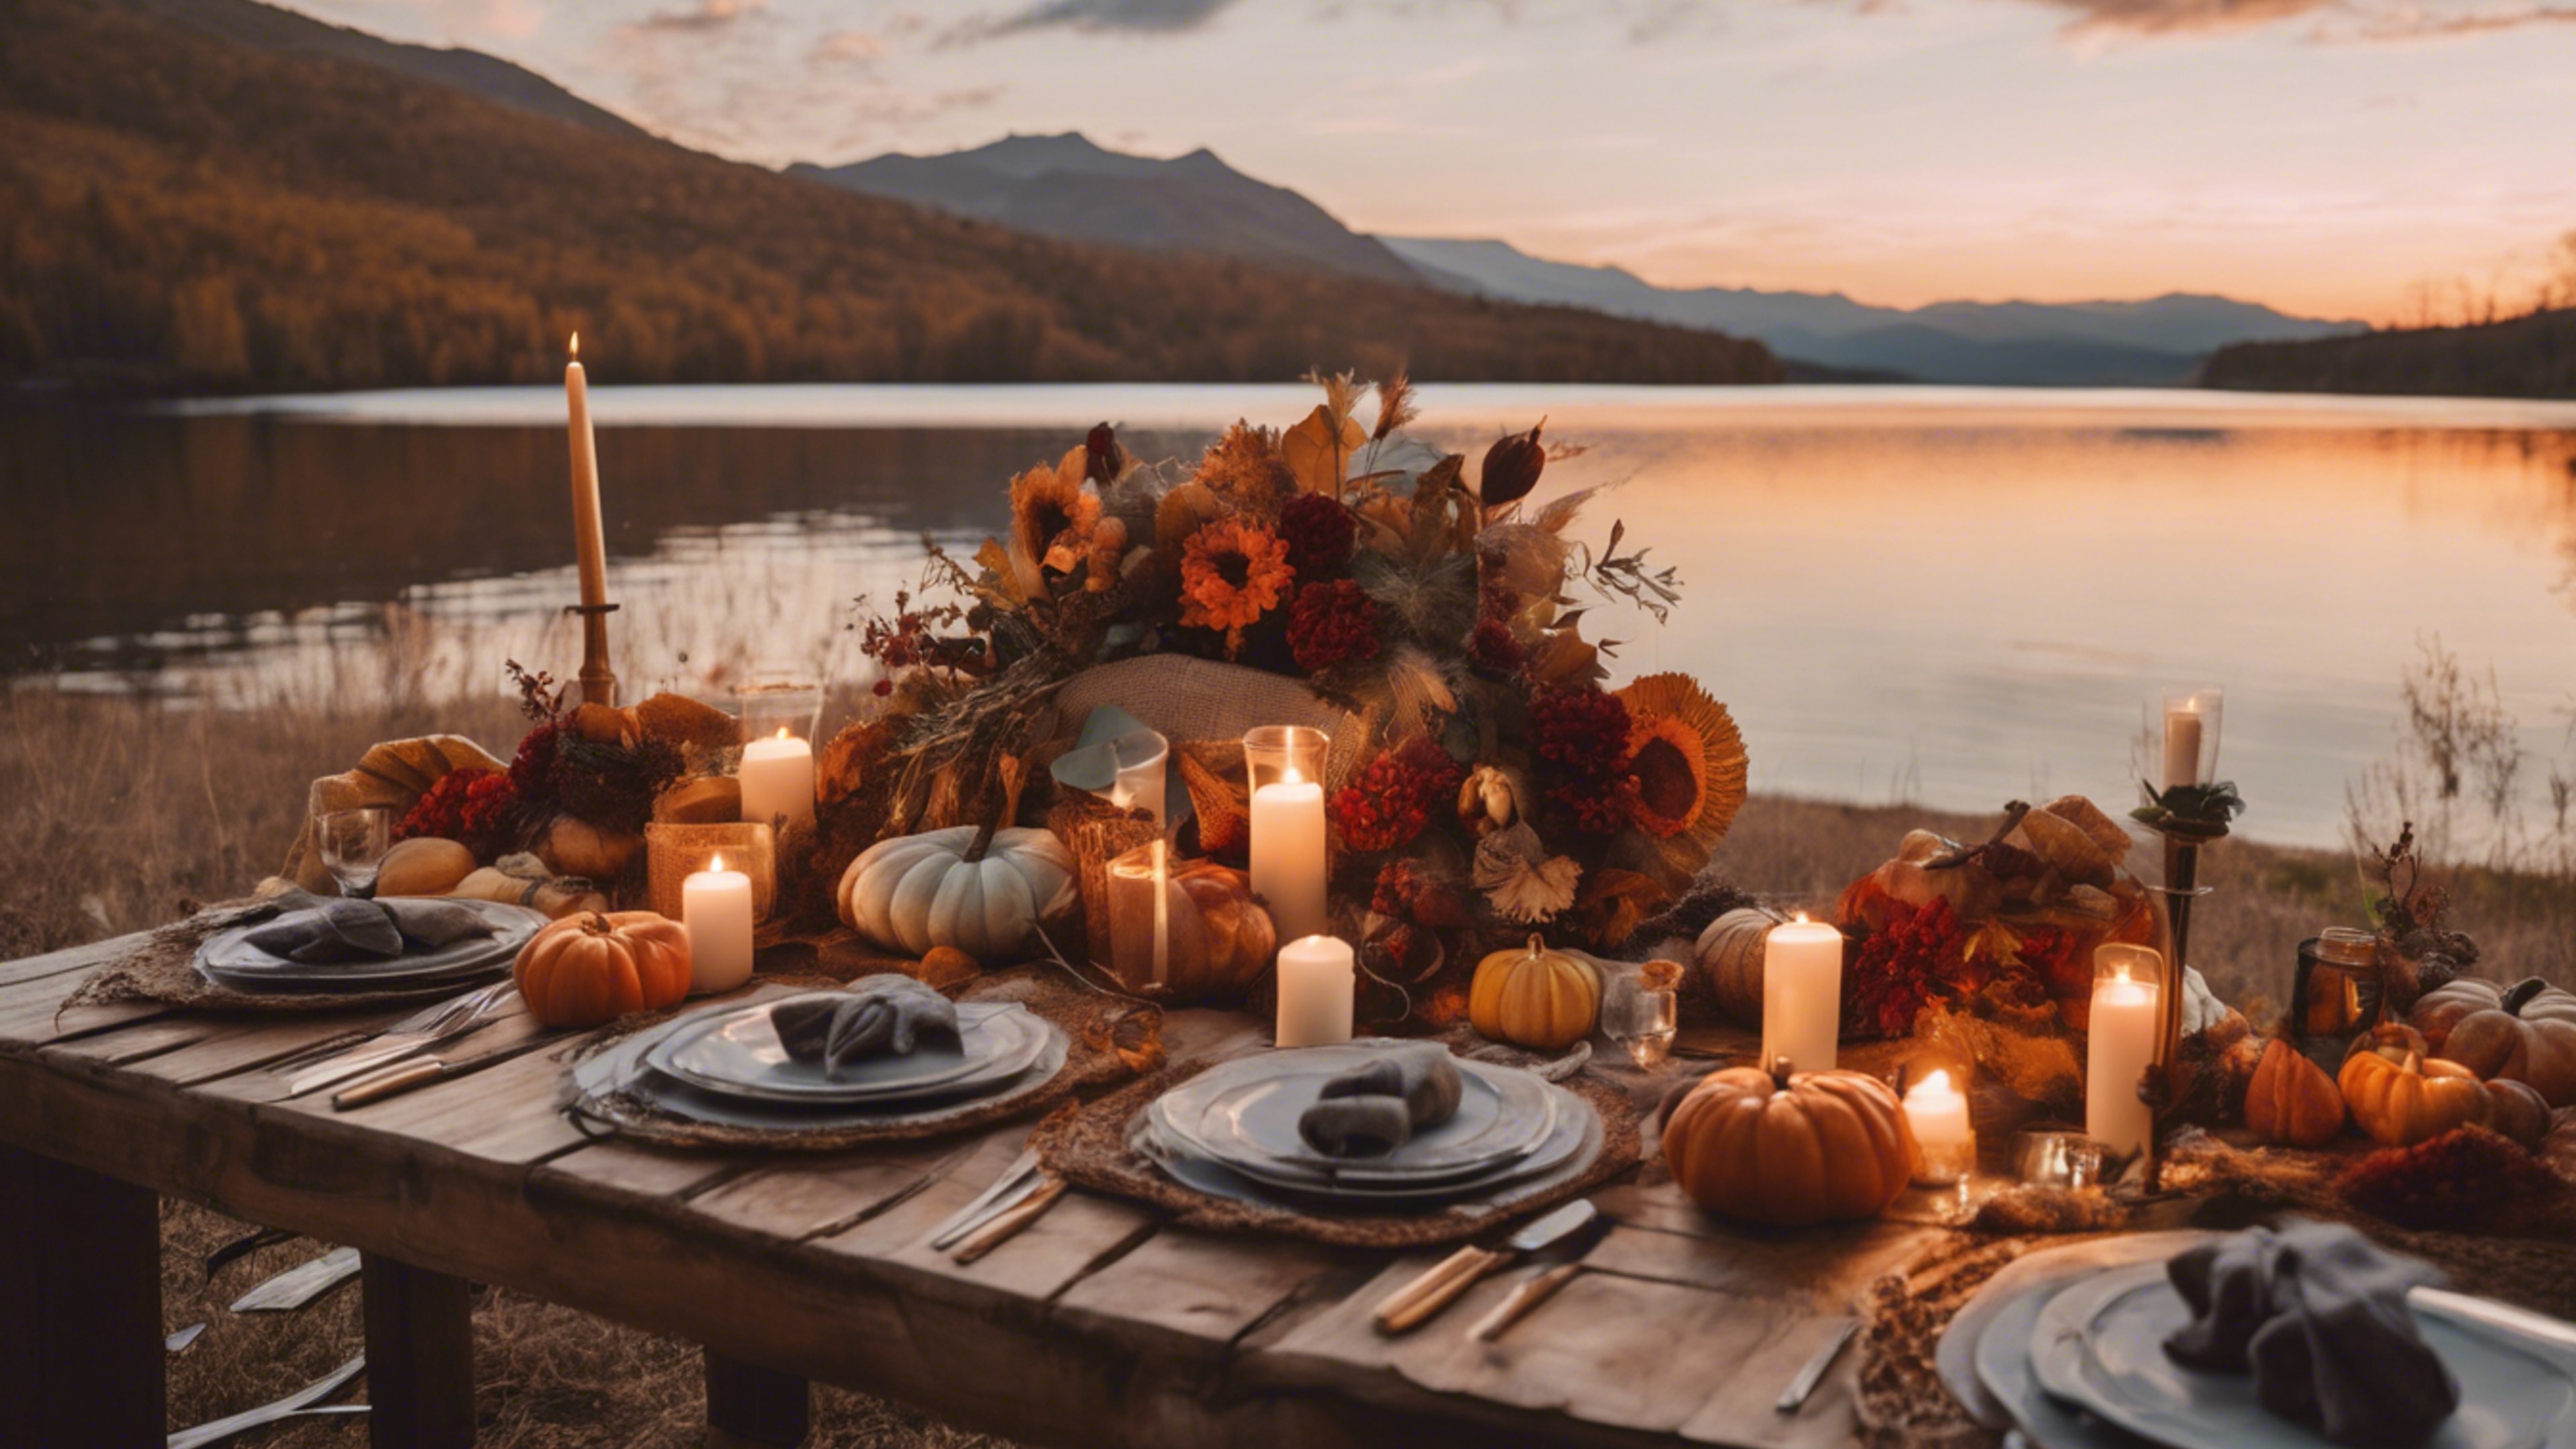 An outdoor Thanksgiving setup with boho decorations next to a breathtaking mountain lake during sunset. Tapeta na zeď[488ff8a1b73146e3b682]